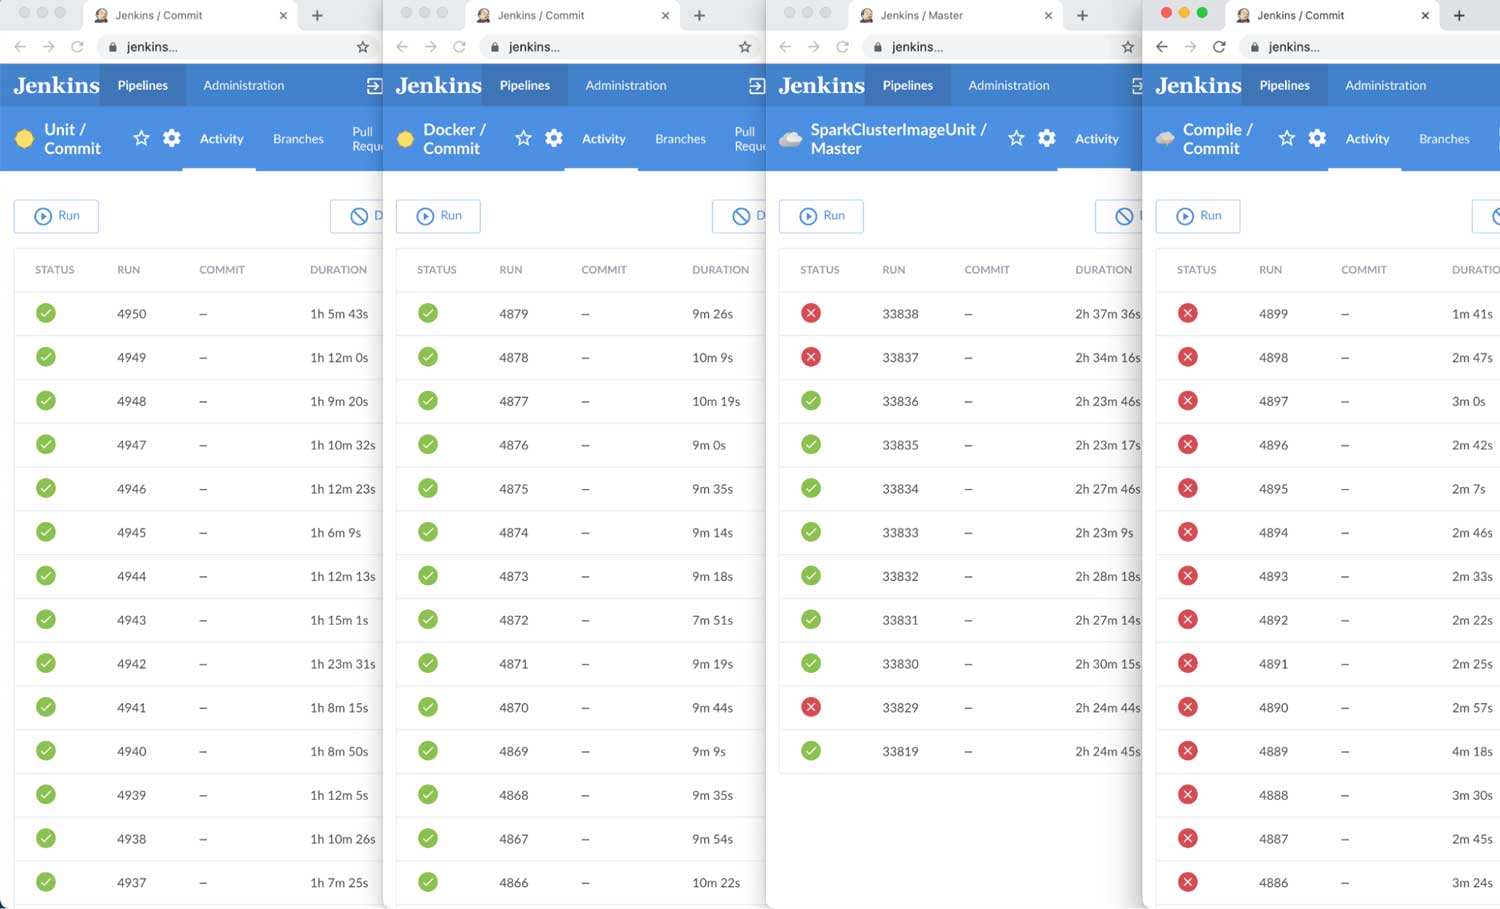 Before   Databricks’ Runbot CI solution, one ended up opening multiple browsers on the office-wall dashboard, positioned them painstakingly side by side, and then opened each one to a different Jenkins job.